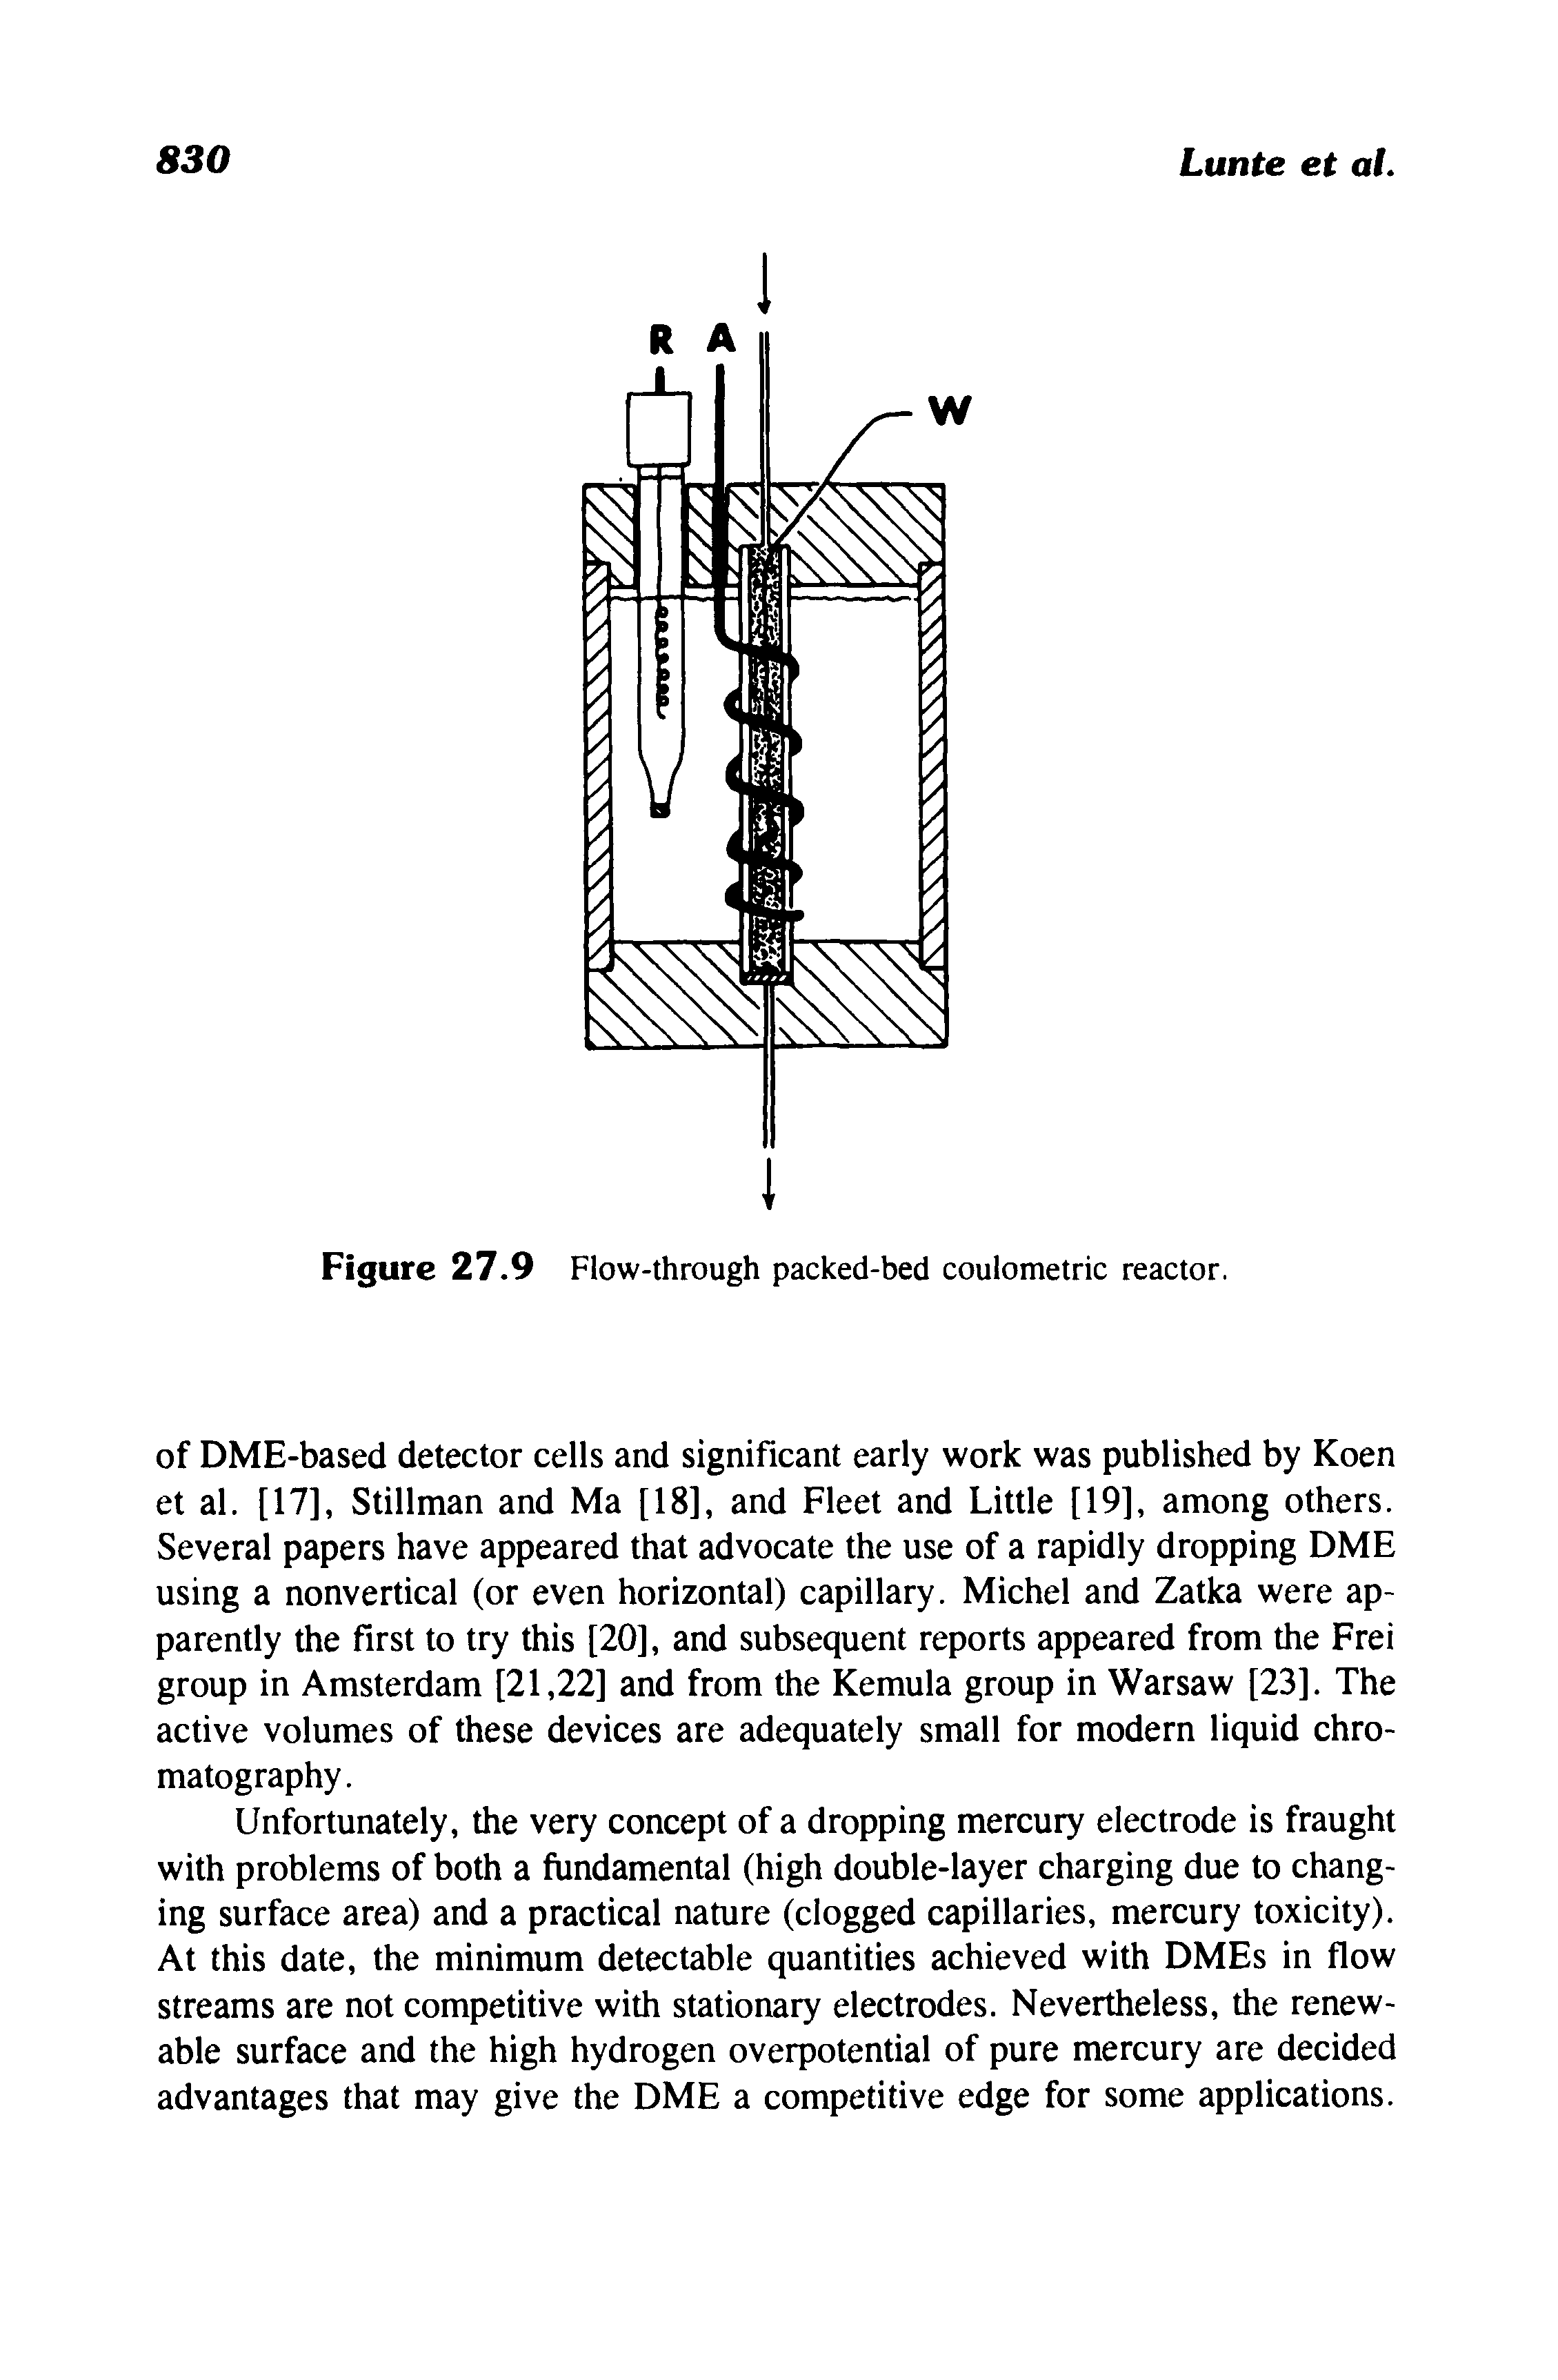 Figure 27.9 Flow-through packed-bed coulometric reactor.